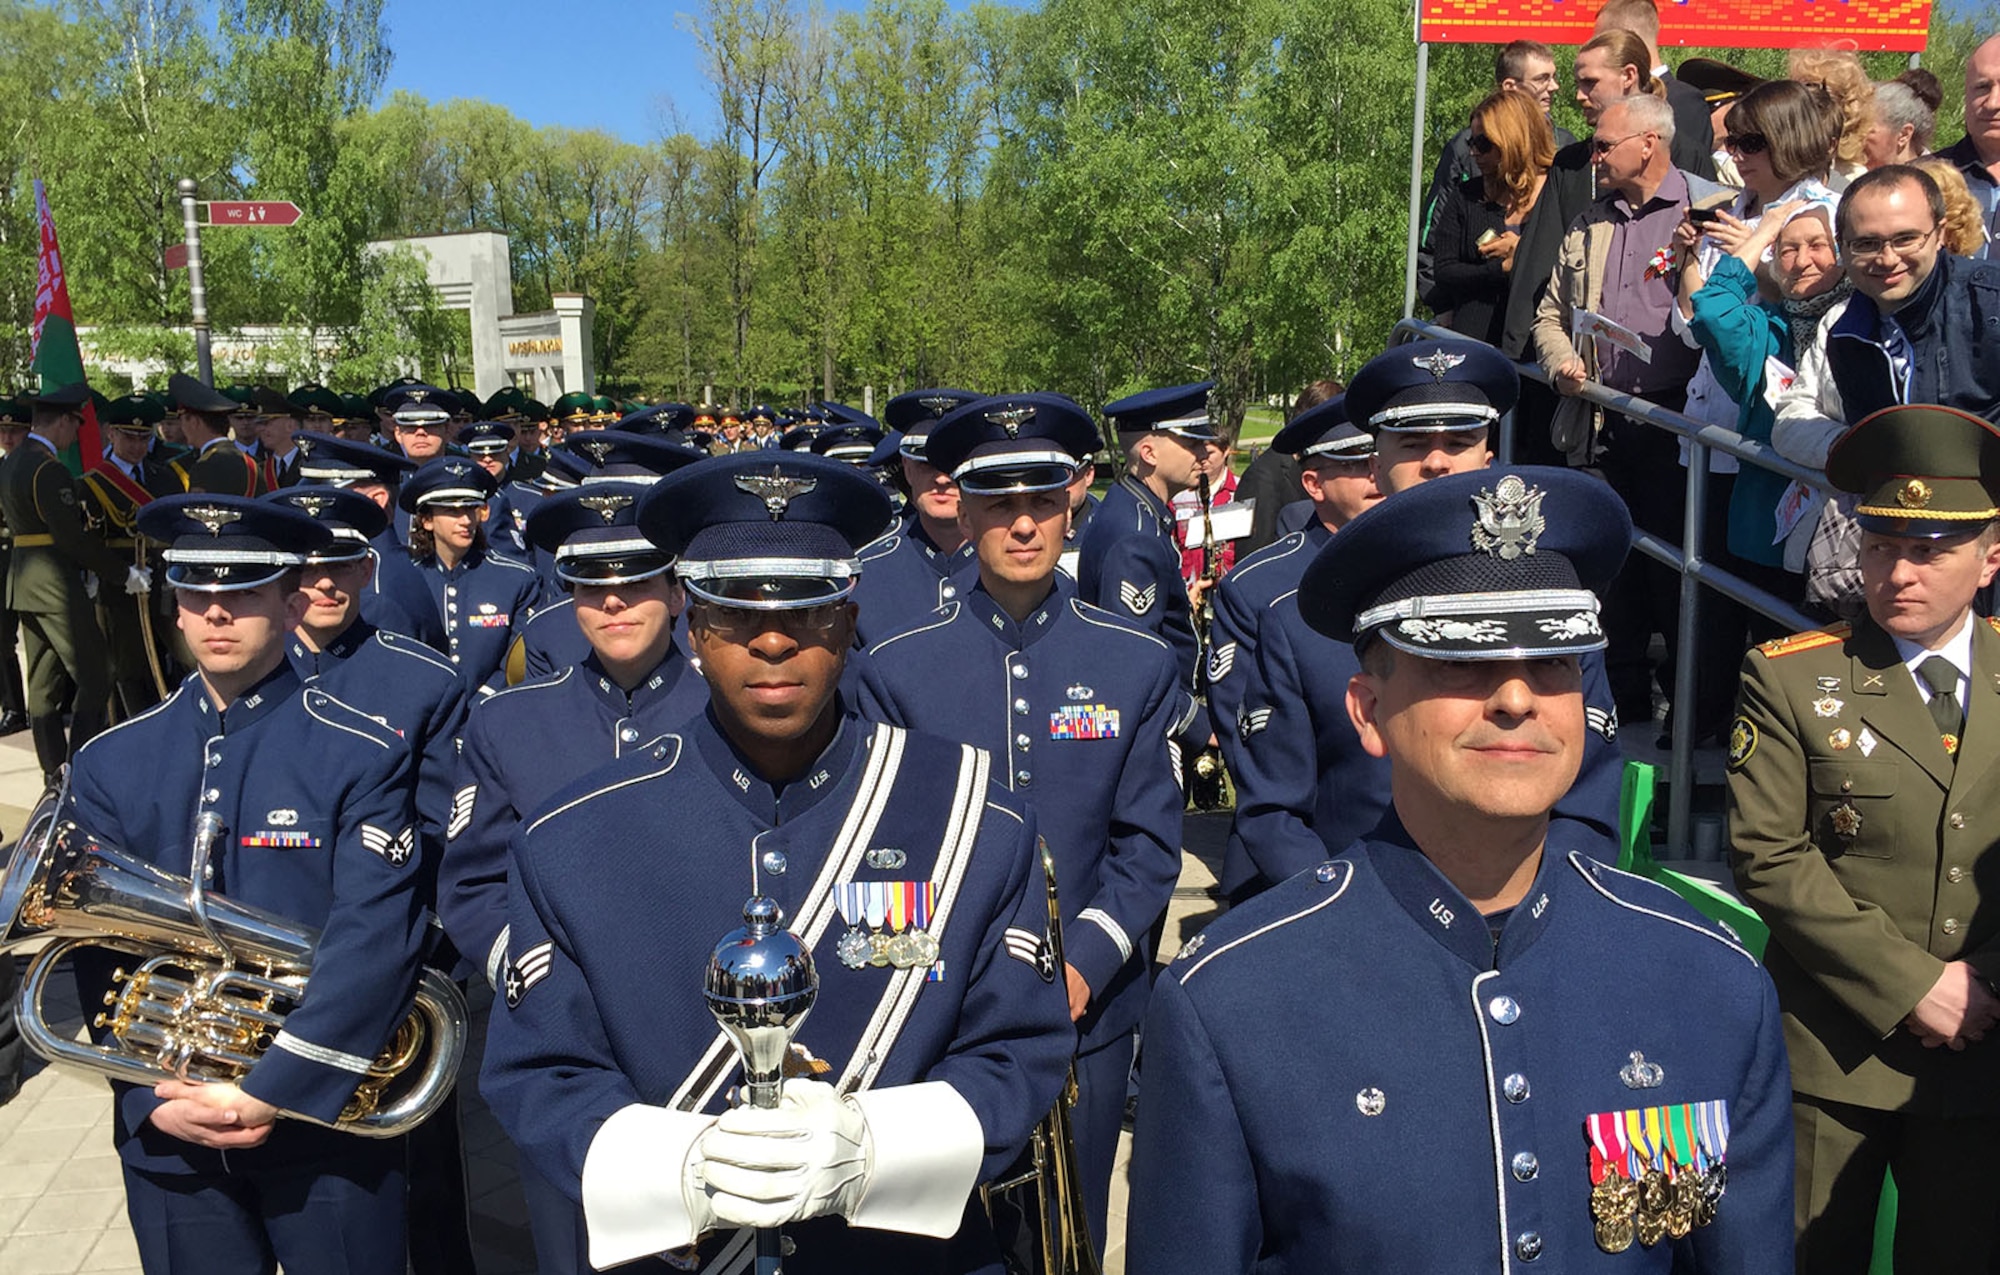 Led by Lt. Col. Mike Mench, the U.S. Air Forces in Europe Band commander, and Staff Sgt. Chris Jackson, the USAFE Band drum major, the USAFE Band gather at a staging point before marching in the World War II Victory Day Parade May 9, 2015, in Minsk, Belarus. The band's participation was the first time in Belarus' history that participants from the U.S. Defense Department marched in the parade to commemorate the sacrifices of the World War II Allies and the end of hostilities 70 years ago. In addition to their participation in the Victory Day parade, which included more than 5,000 Belarusian soldiers and 250 military vehicles, the 34 USAFE bandsmen performed concerts in Brest and Minsk, Belarus. (U.S. Air Force photo/Master Sgt. Brian Bahret)